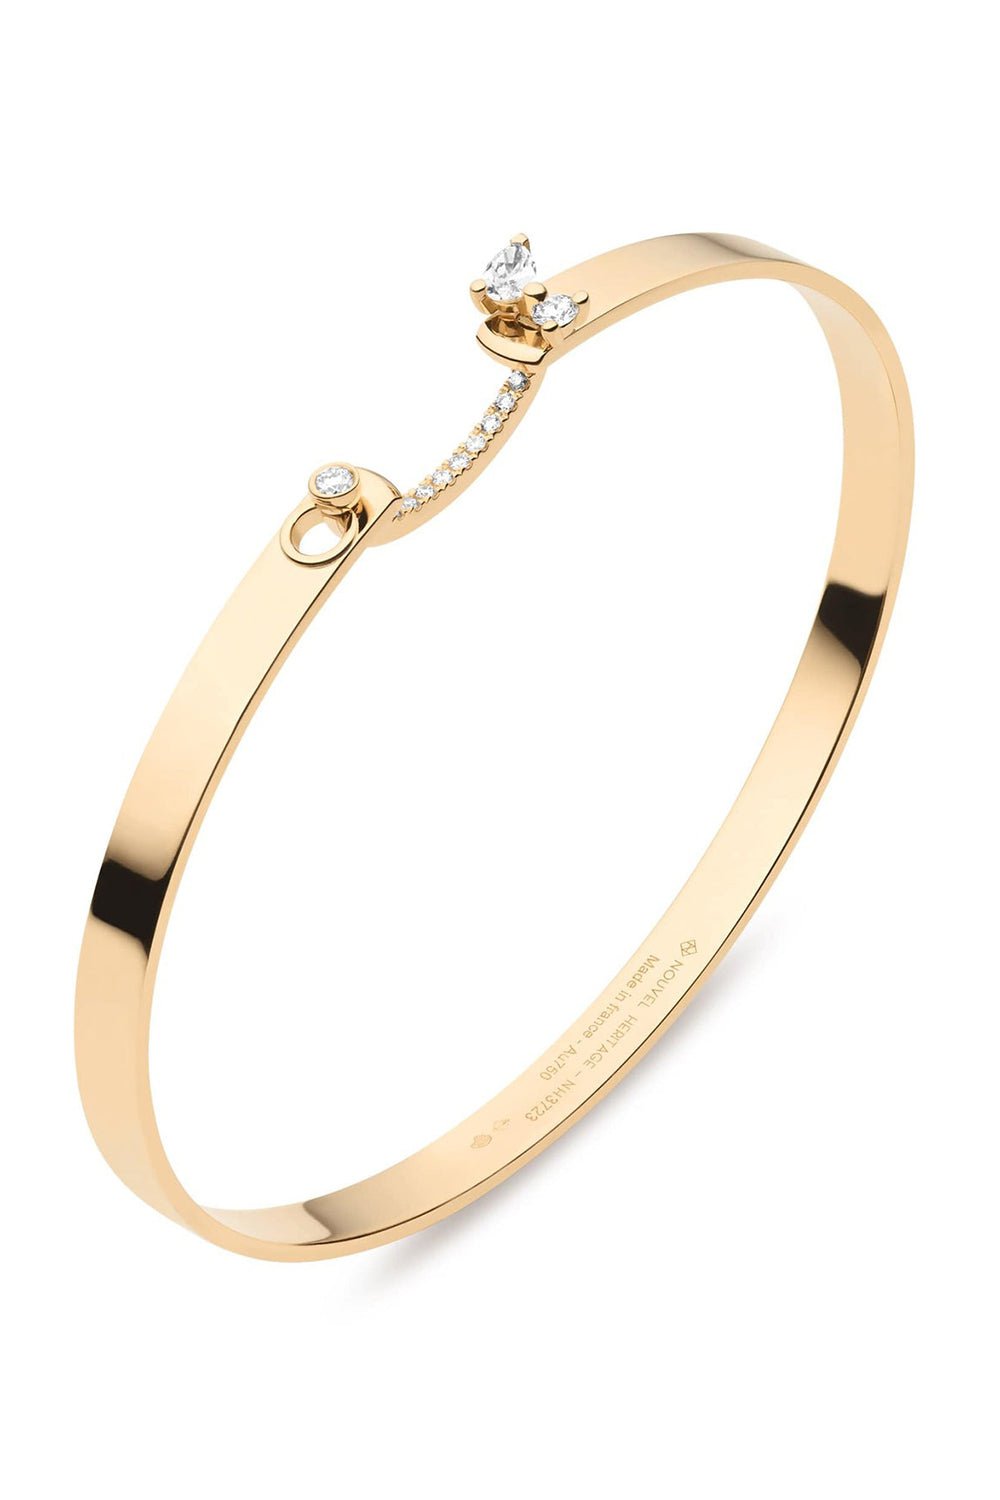 NOUVEL HERITAGE-Cocktail Time Mood Bangle-YELLOW GOLD